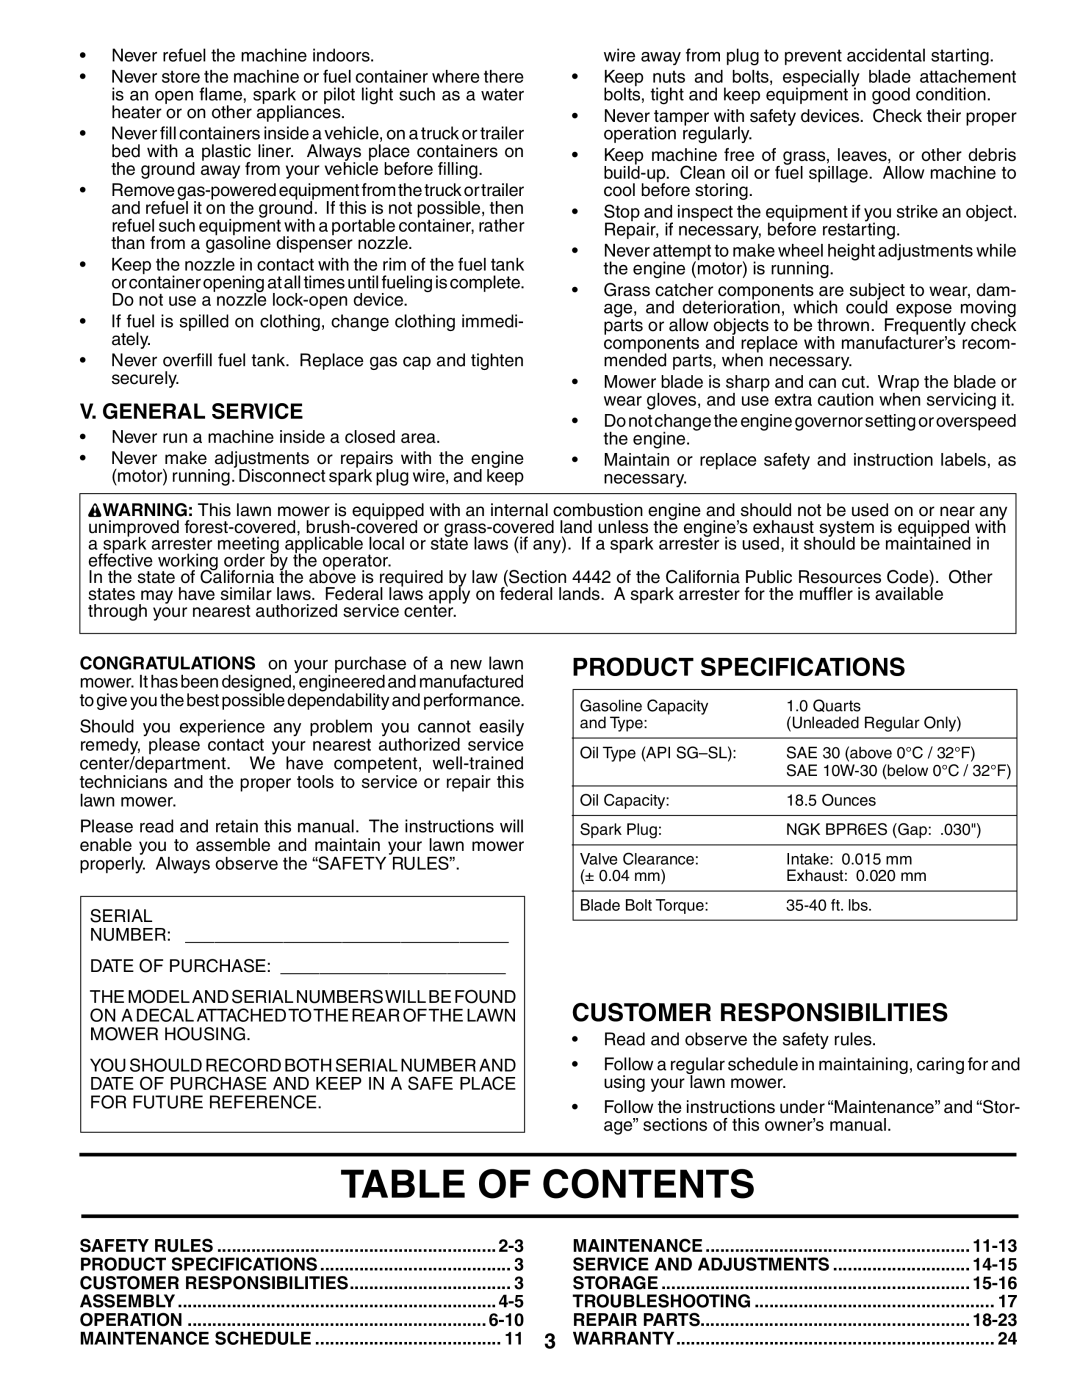 Husqvarna 55R21HVL Table Of Contents, Product Specifications, Customer Responsibilities, V. General Service, 6-10, 11-13 